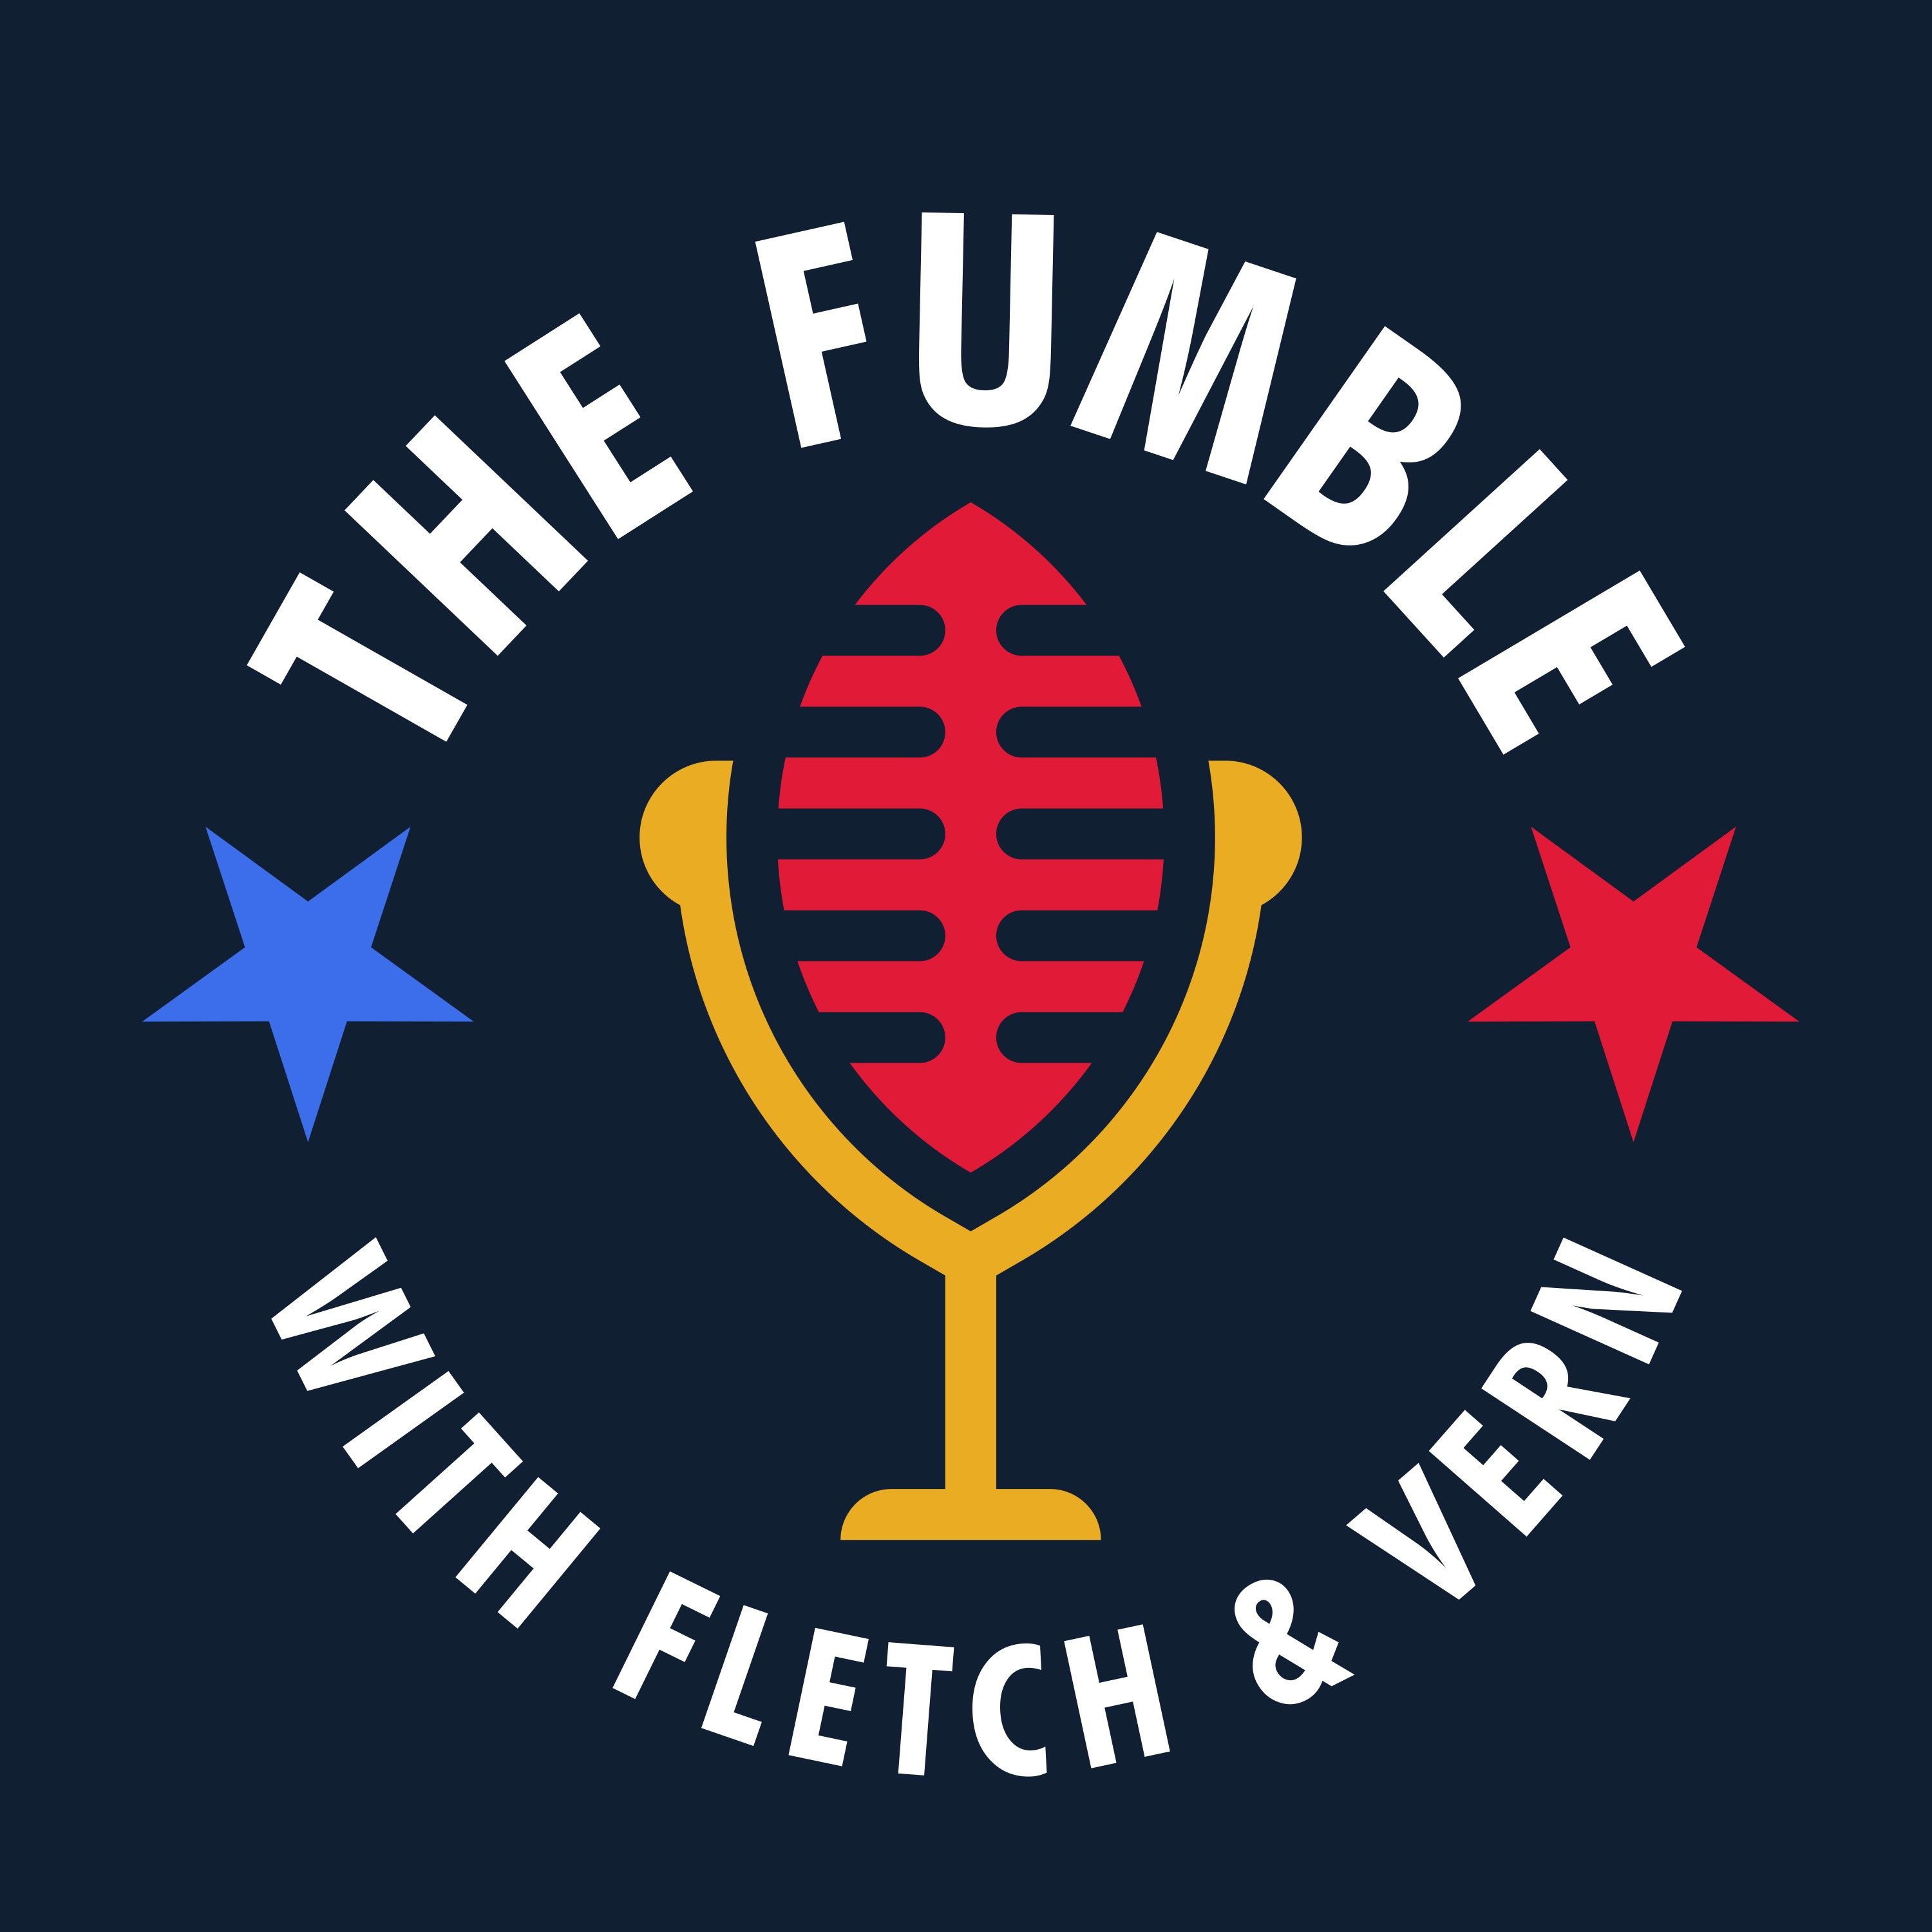 THE FUMBLE with FLETCH & VERN S4E2 with JIM MCMAHON - CHICAGO BEARS